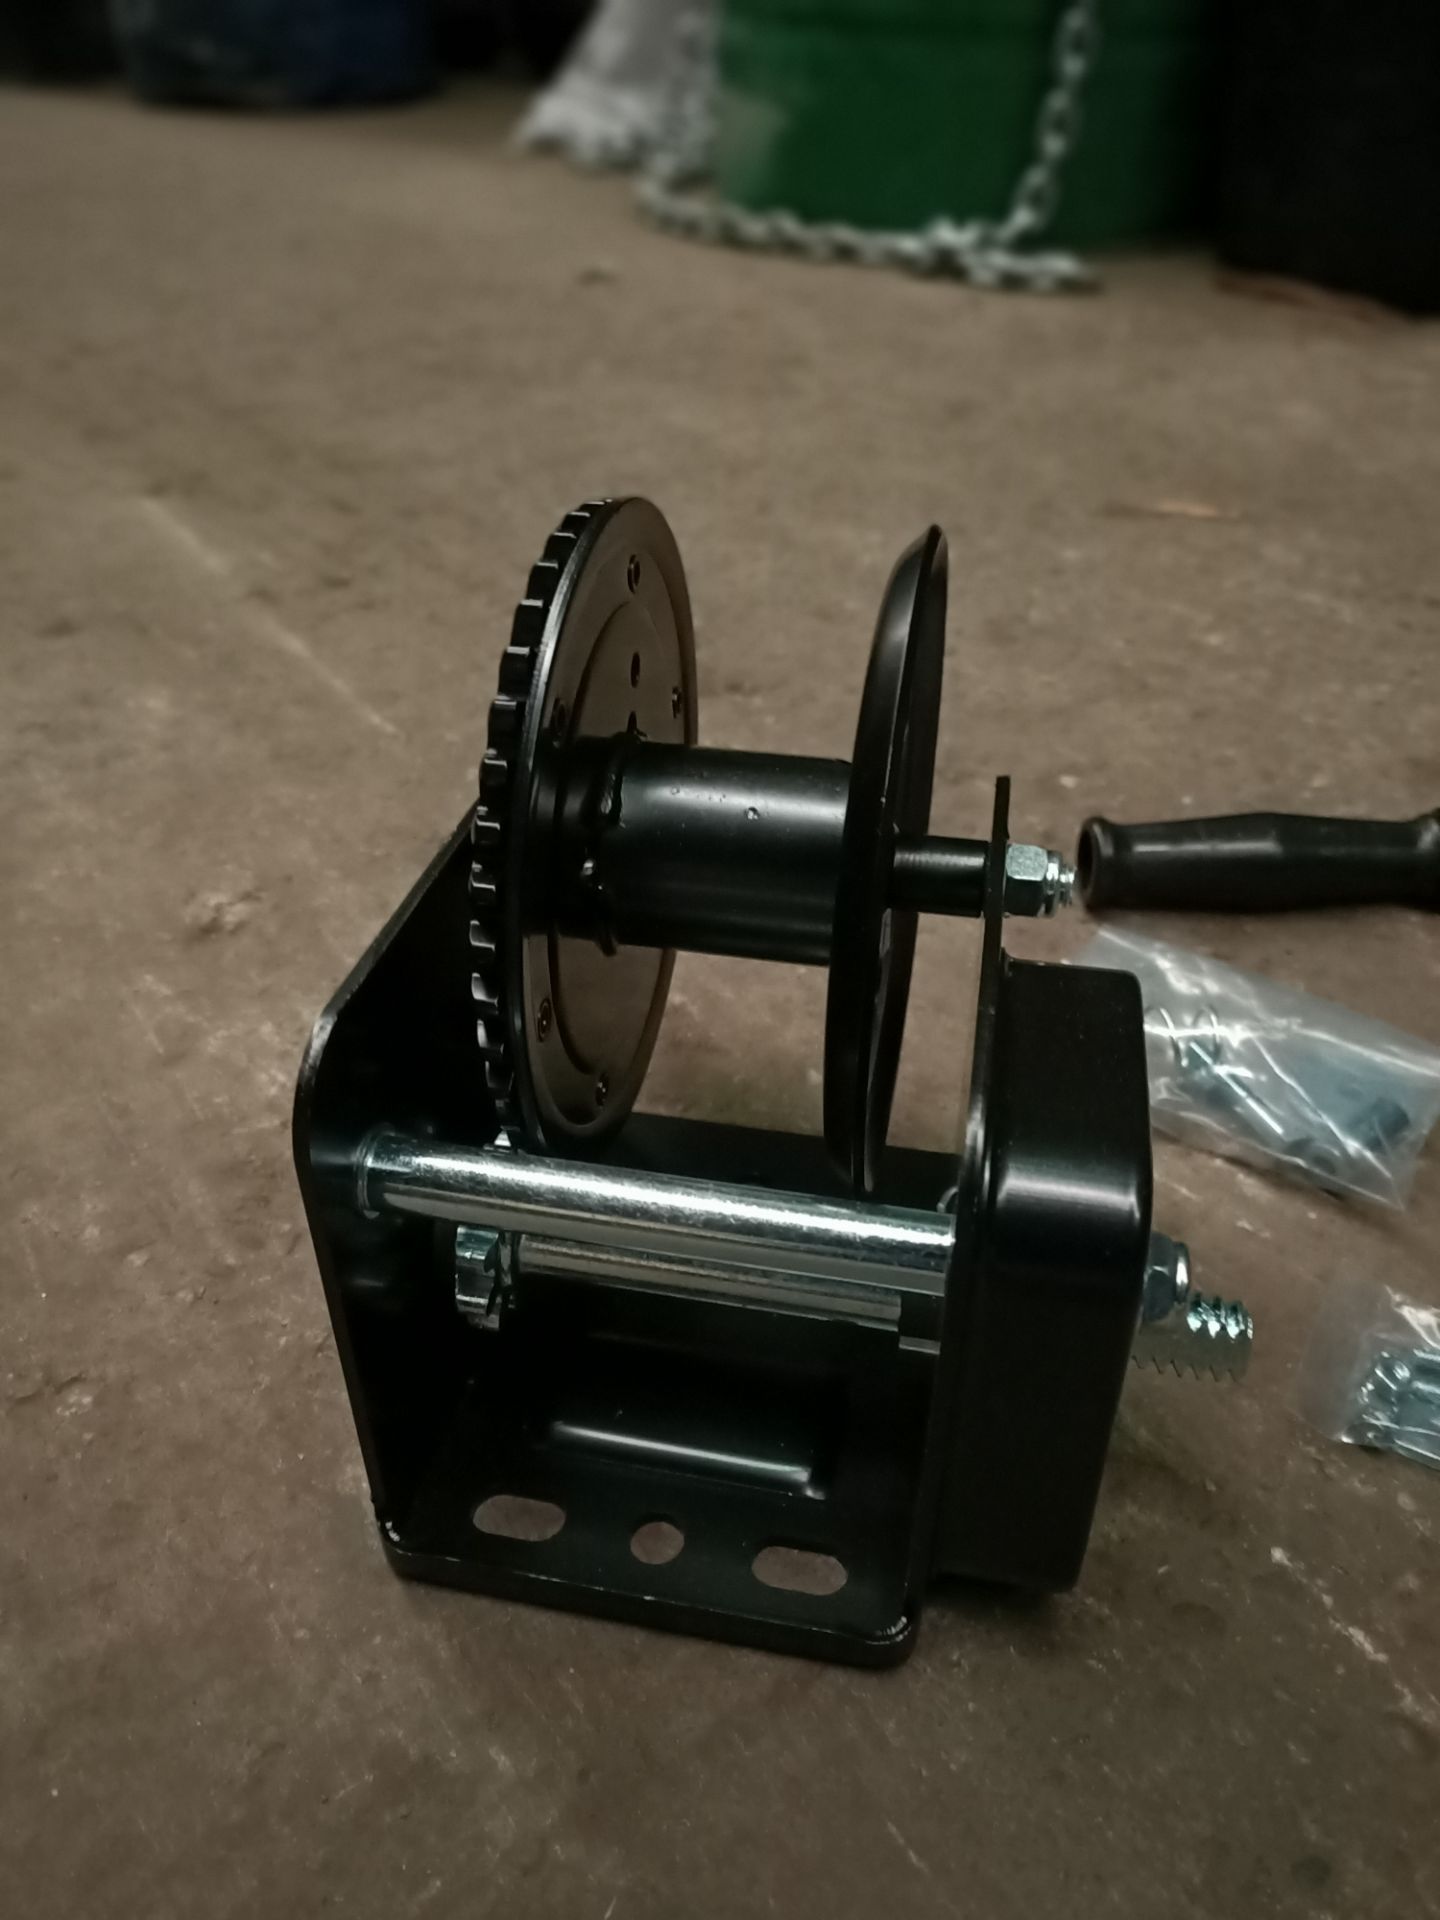 600LBS BLACK HAND WINCH WITH BRAKE (NOT FOR LIFTING) - Image 2 of 3